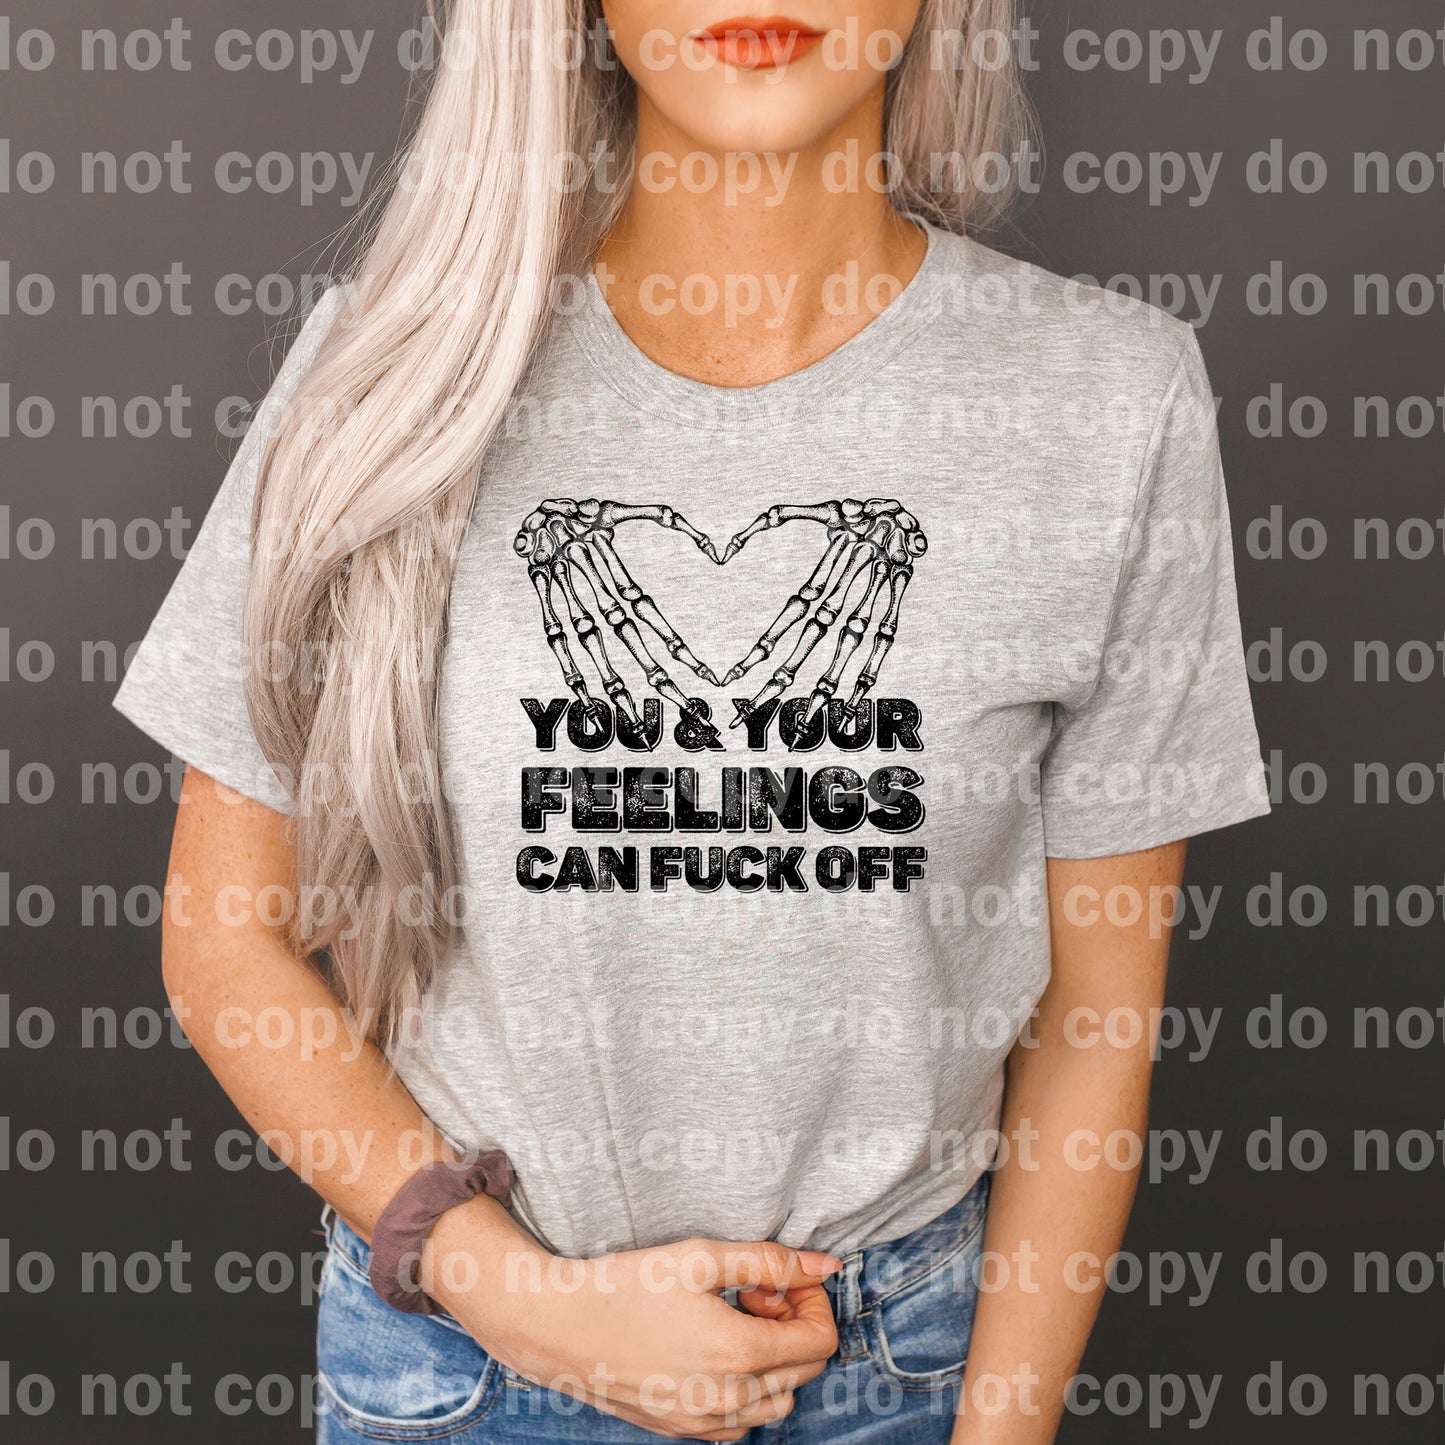 You And Your Feelings an Fuck Off Distressed Dream Print or Sublimation Print